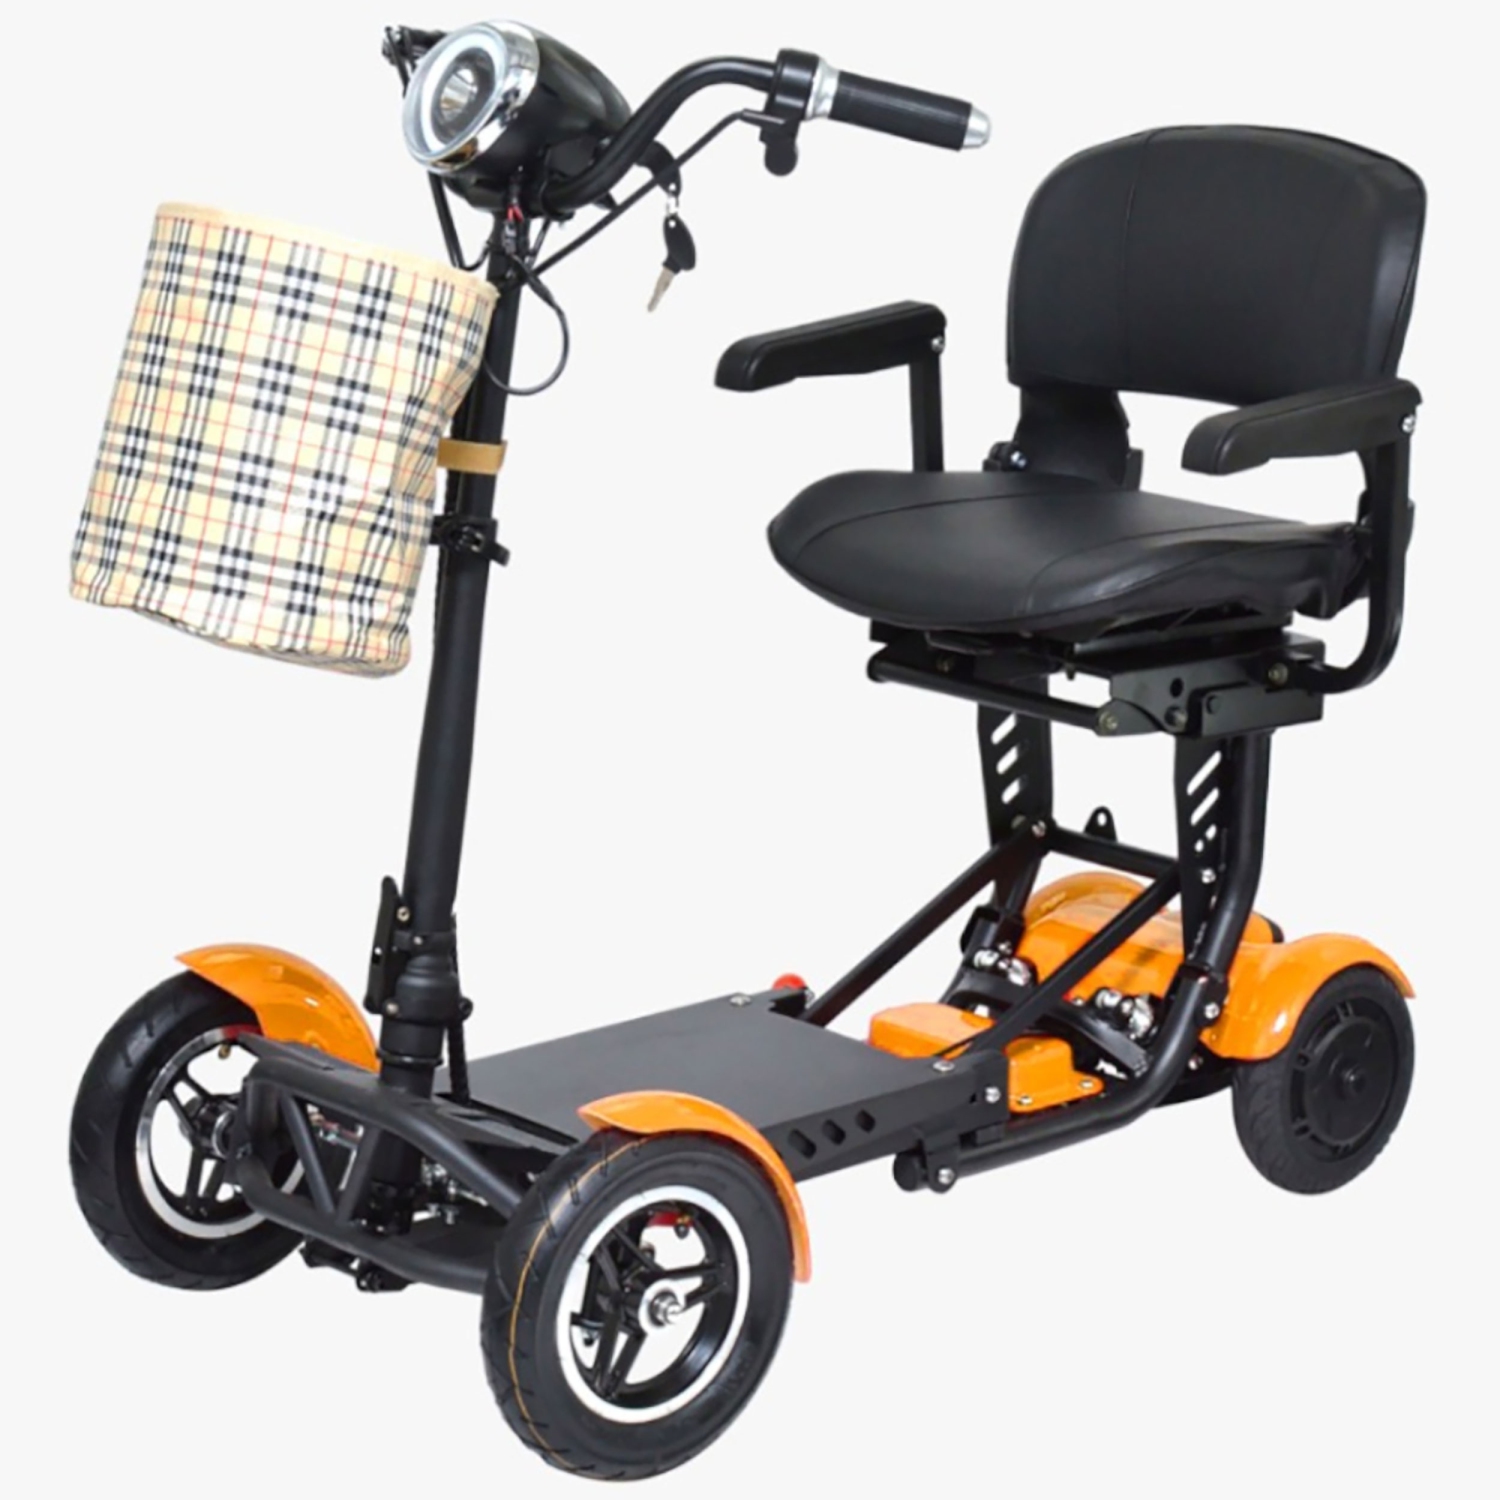 Lightweight Heavy Duty Electric Mobility Scooter, Wide Premium Seat and Adjustable Handlebar, Up to 12 Miles - Gold Color